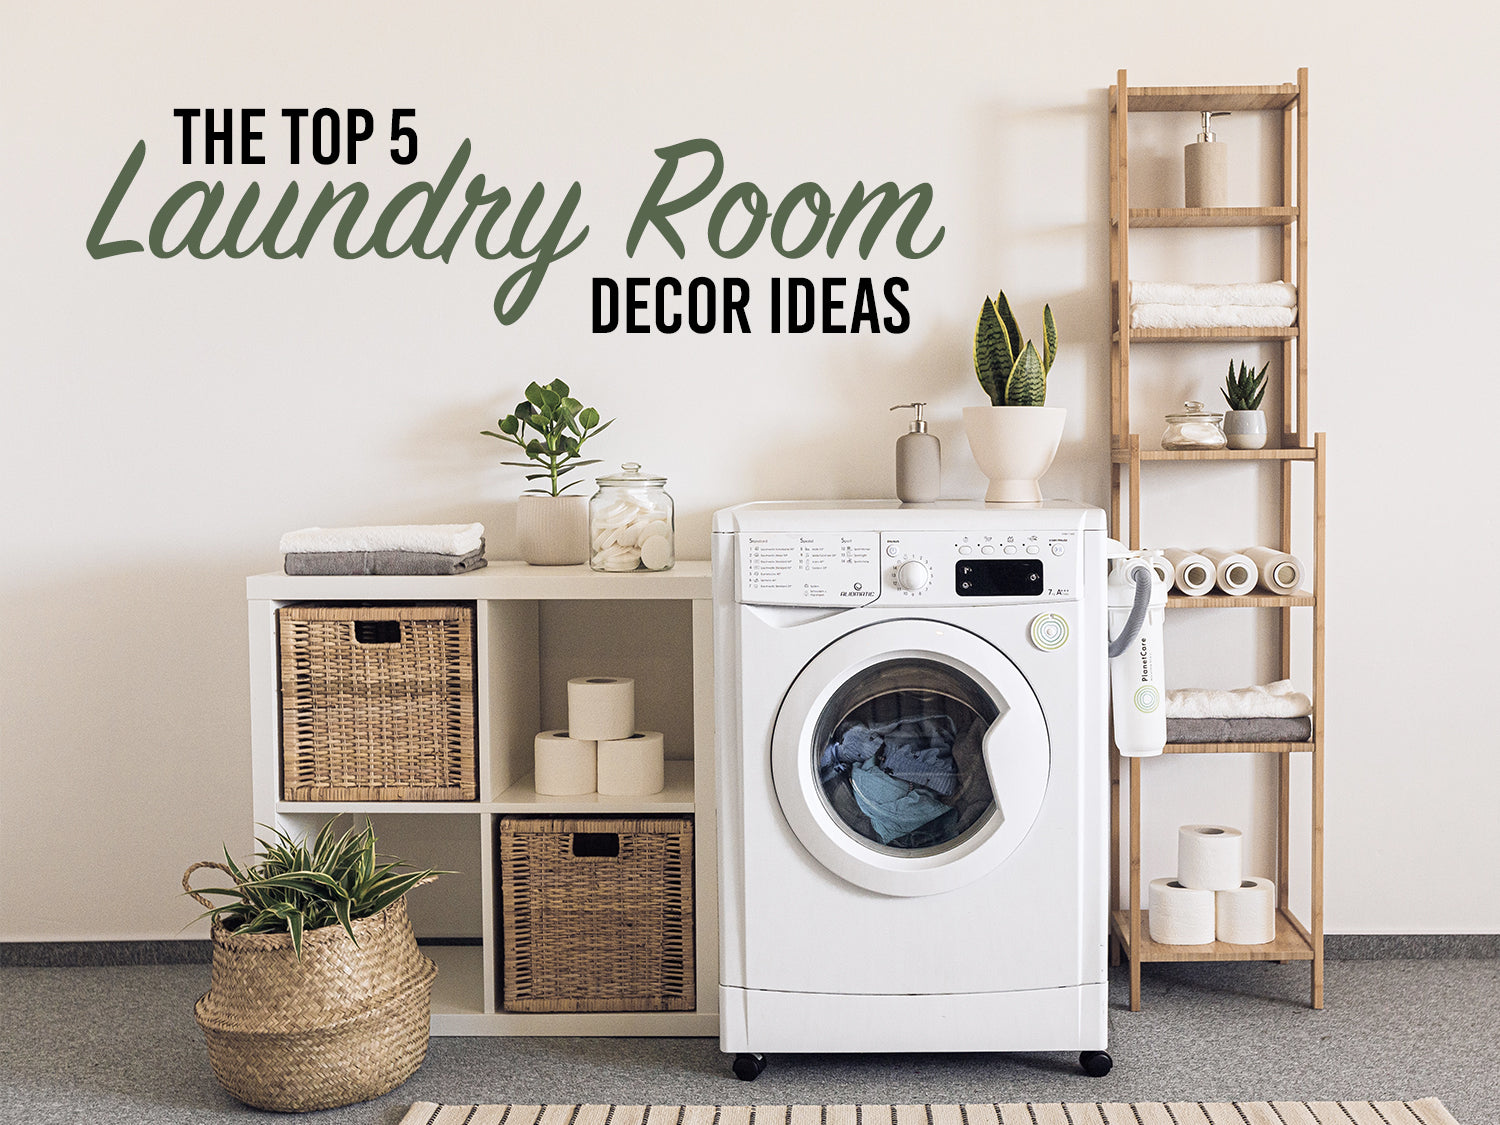 Top 5 Laundry Room Decor Ideas - Story of Home Decals